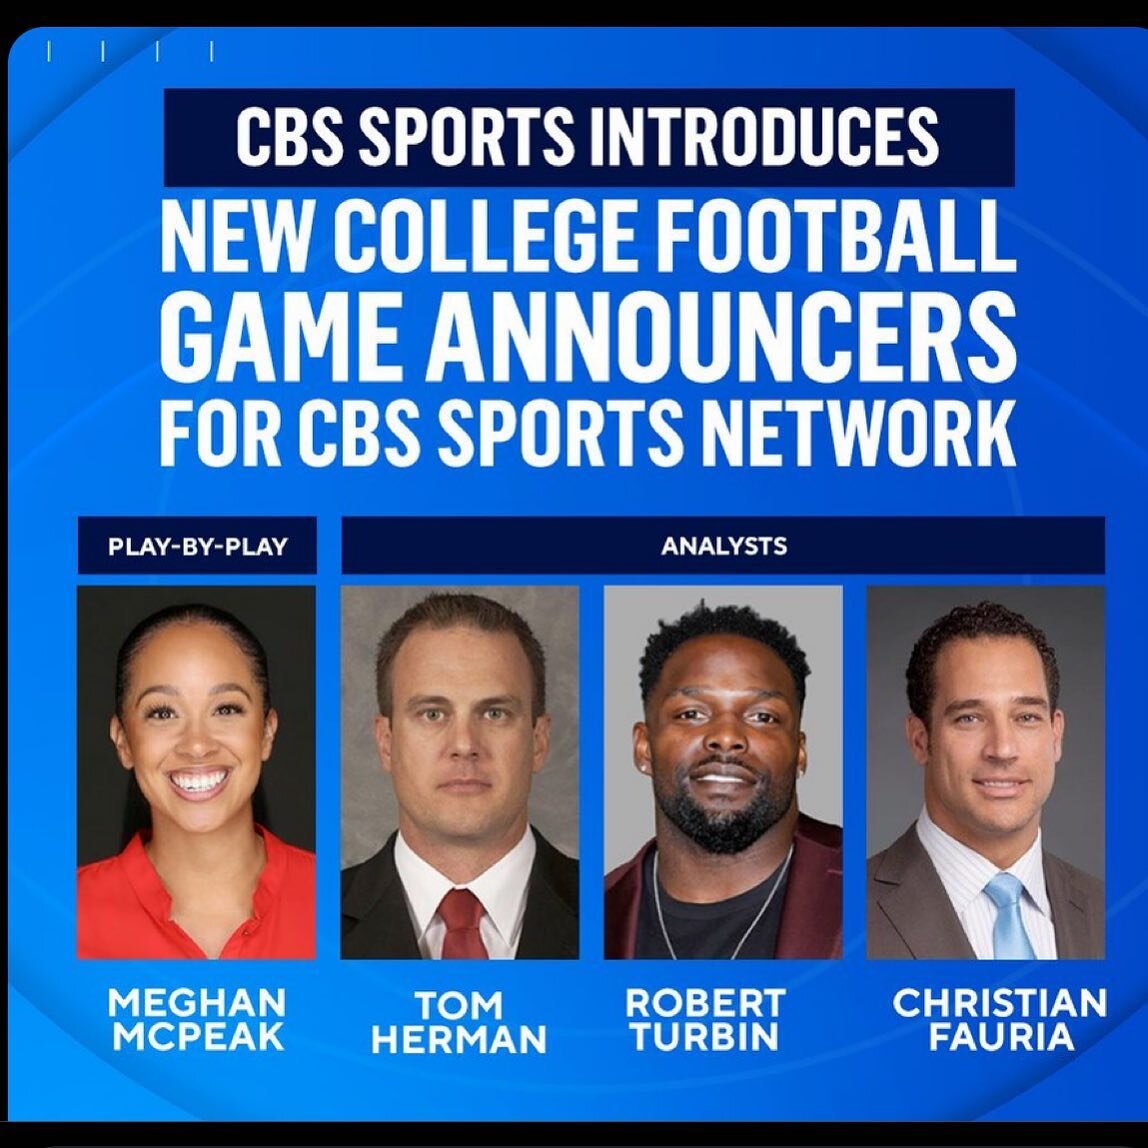 &ldquo;Yup, that&rsquo;s me. You&rsquo;re probably wondering how I got here&rdquo; - excited to be joining CBS Sports coverage for this upcoming college football season!
&mdash;&mdash;&mdash;
#CBF #Football #CBS #CBSSports #sportsbroadcasting #womeni